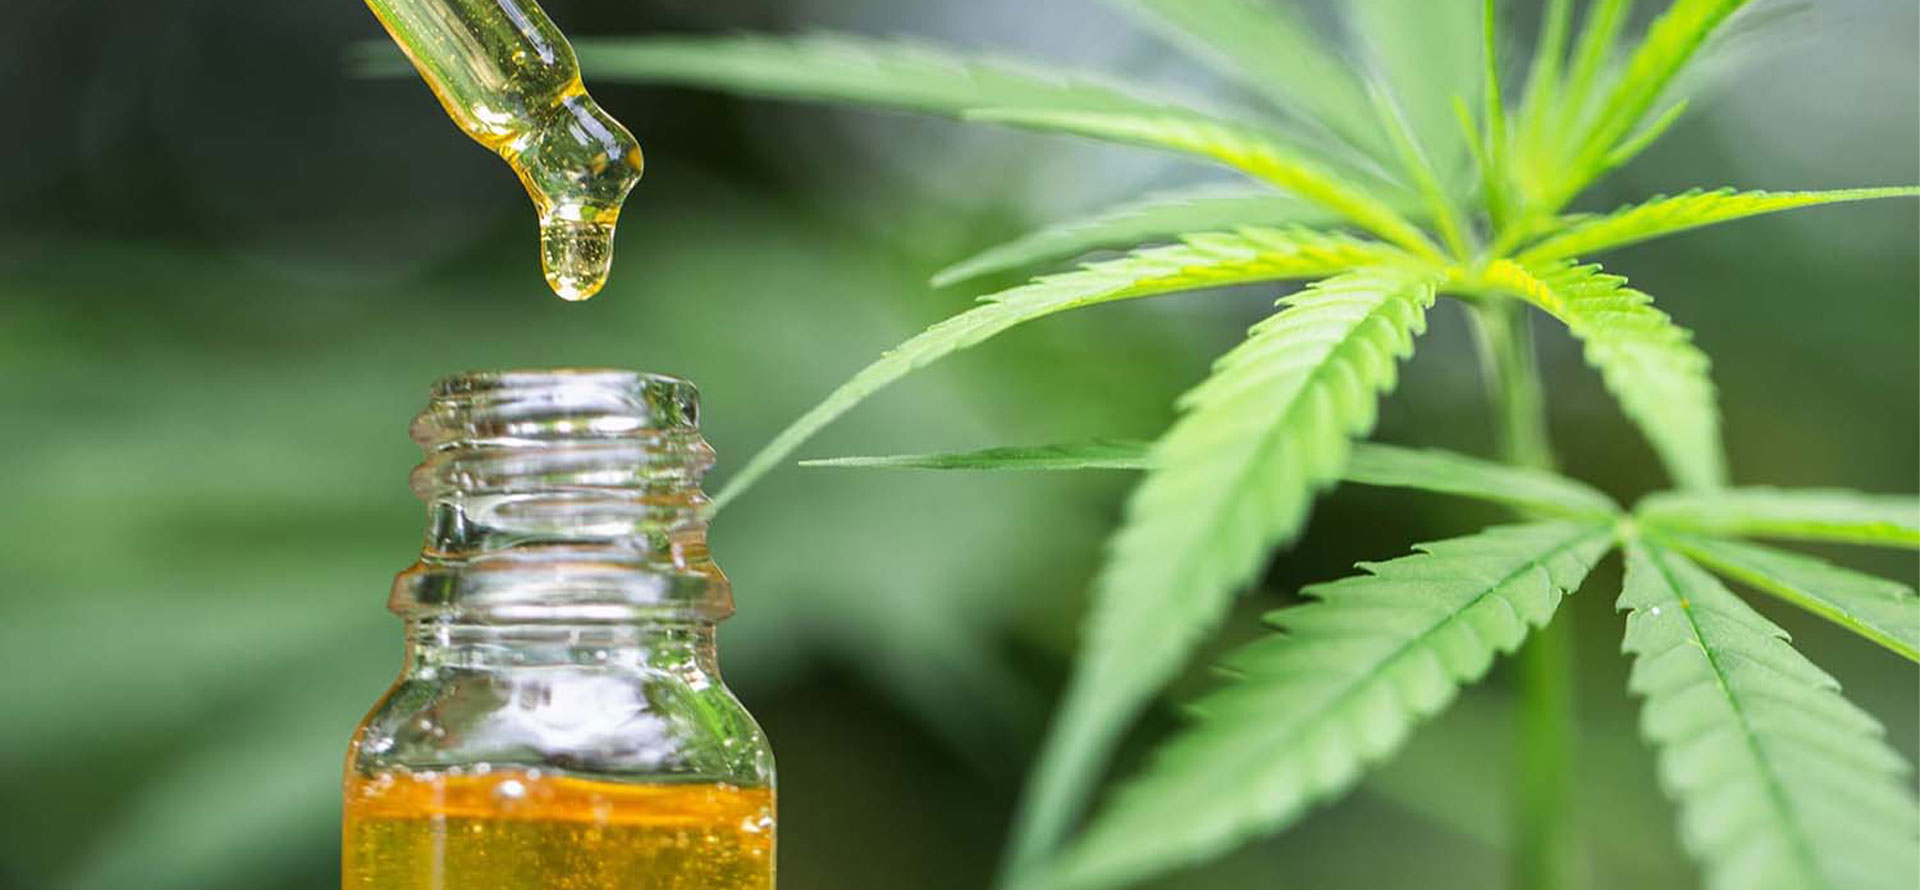 CBC OIL FOR EARACHE - Cbd|Oil|Benefits|Cbc|Effects|Pain|Study|Health|Thc|Products|Cannabinoids|Studies|Research|Anxiety|Cannabis|Symptoms|Evidence|People|System|Disease|Treatment|Inflammation|Hemp|Body|Receptors|Disorders|Brain|Plant|Cells|Side|Effect|Blood|Patients|Cancer|Product|Skin|Marijuana|Properties|Cannabidiol|Cannabinoid|Cbd Oil|Cbd Products|Cbc Oil|Side Effects|Endocannabinoid System|Chronic Pain|Multiple Sclerosis|Pain Relief|Cannabis Plant|Cbd Oil Benefits|Blood Pressure|Health Benefits|High Blood Pressure|Anti-Inflammatory Properties|Neuropathic Pain|Animal Studies|Hemp Plant|Hemp Oil|Anxiety Disorders|Cbd Product|Immune System|Clinical Trials|Cbd Gummies|Nerve Cells|Nervous System|Entourage Effect|Hemp Seed Oil|United States|Cbd Oils|Drug Administration